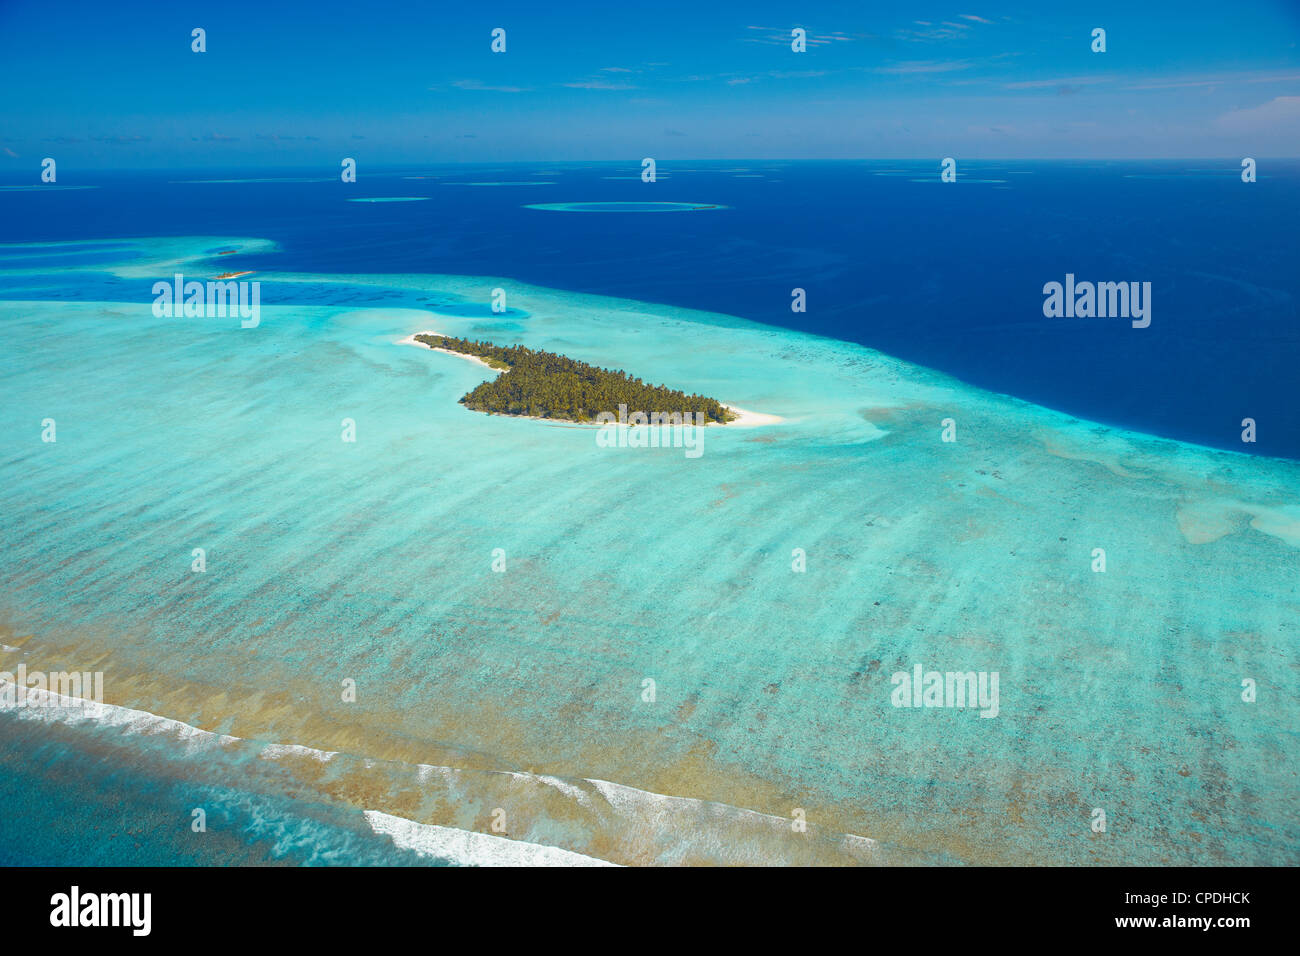 Aerial view of a tropical island, Maldives, Indian Ocean, Asia Stock Photo